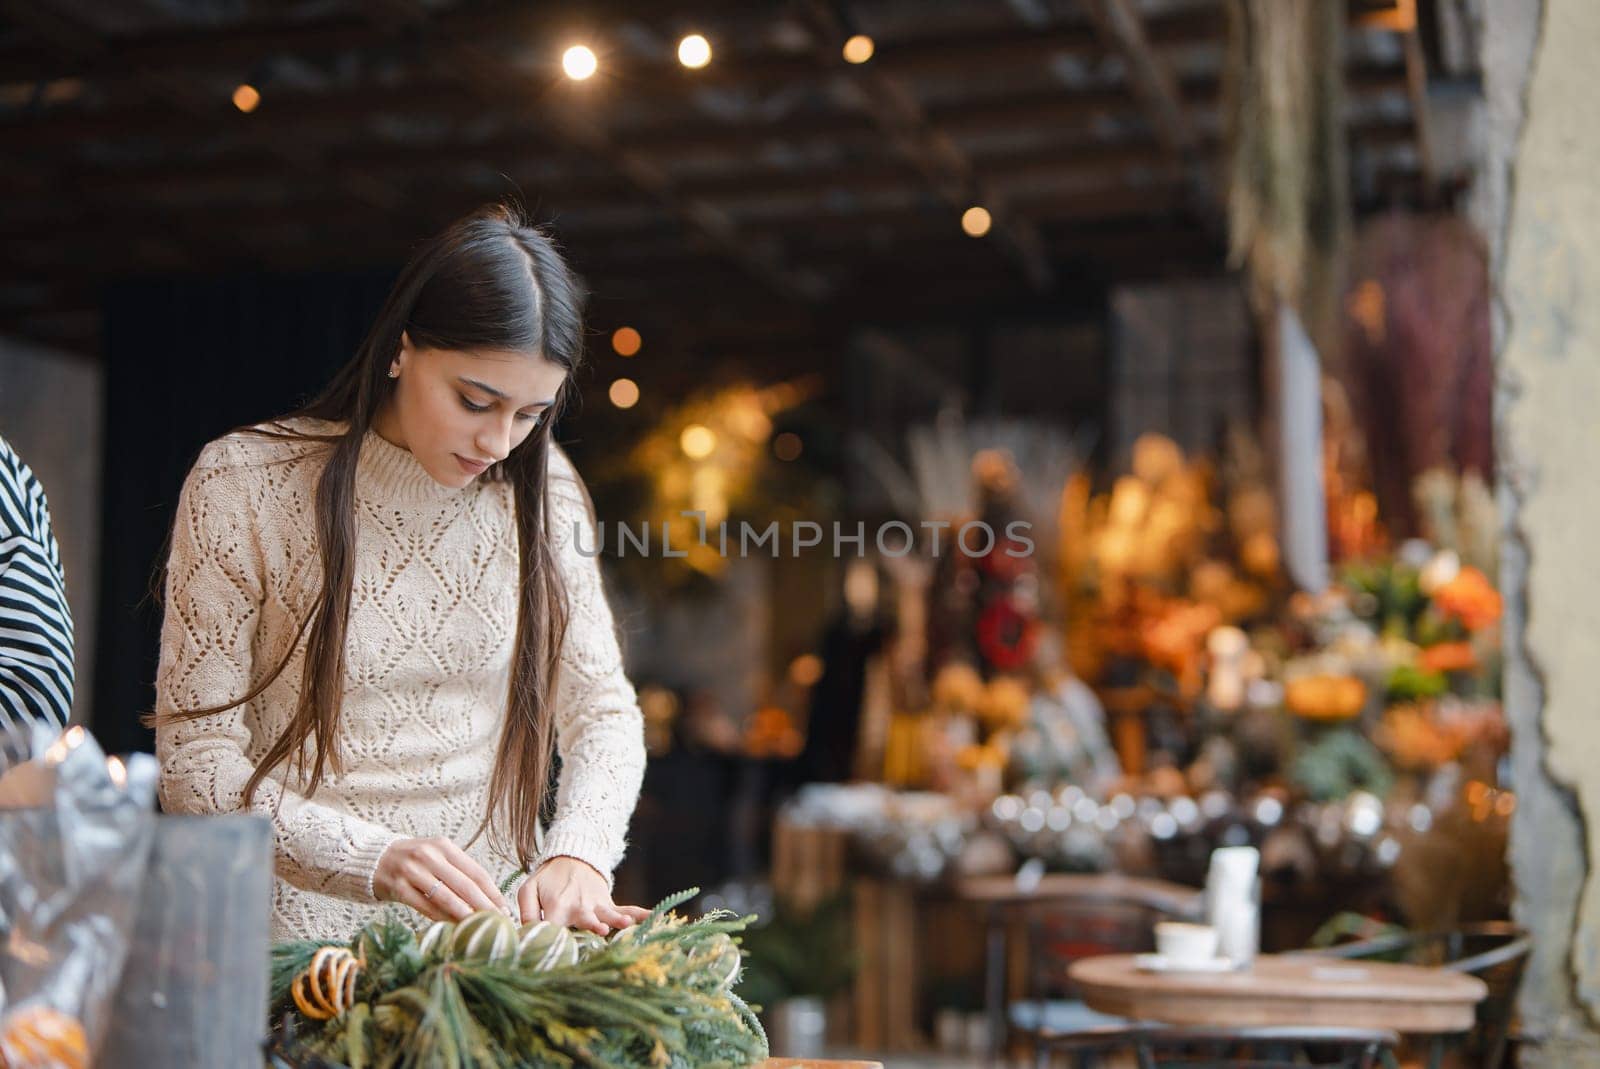 Finishing touches on the Christmas wreath displayed at the flower shop counter. High quality photo